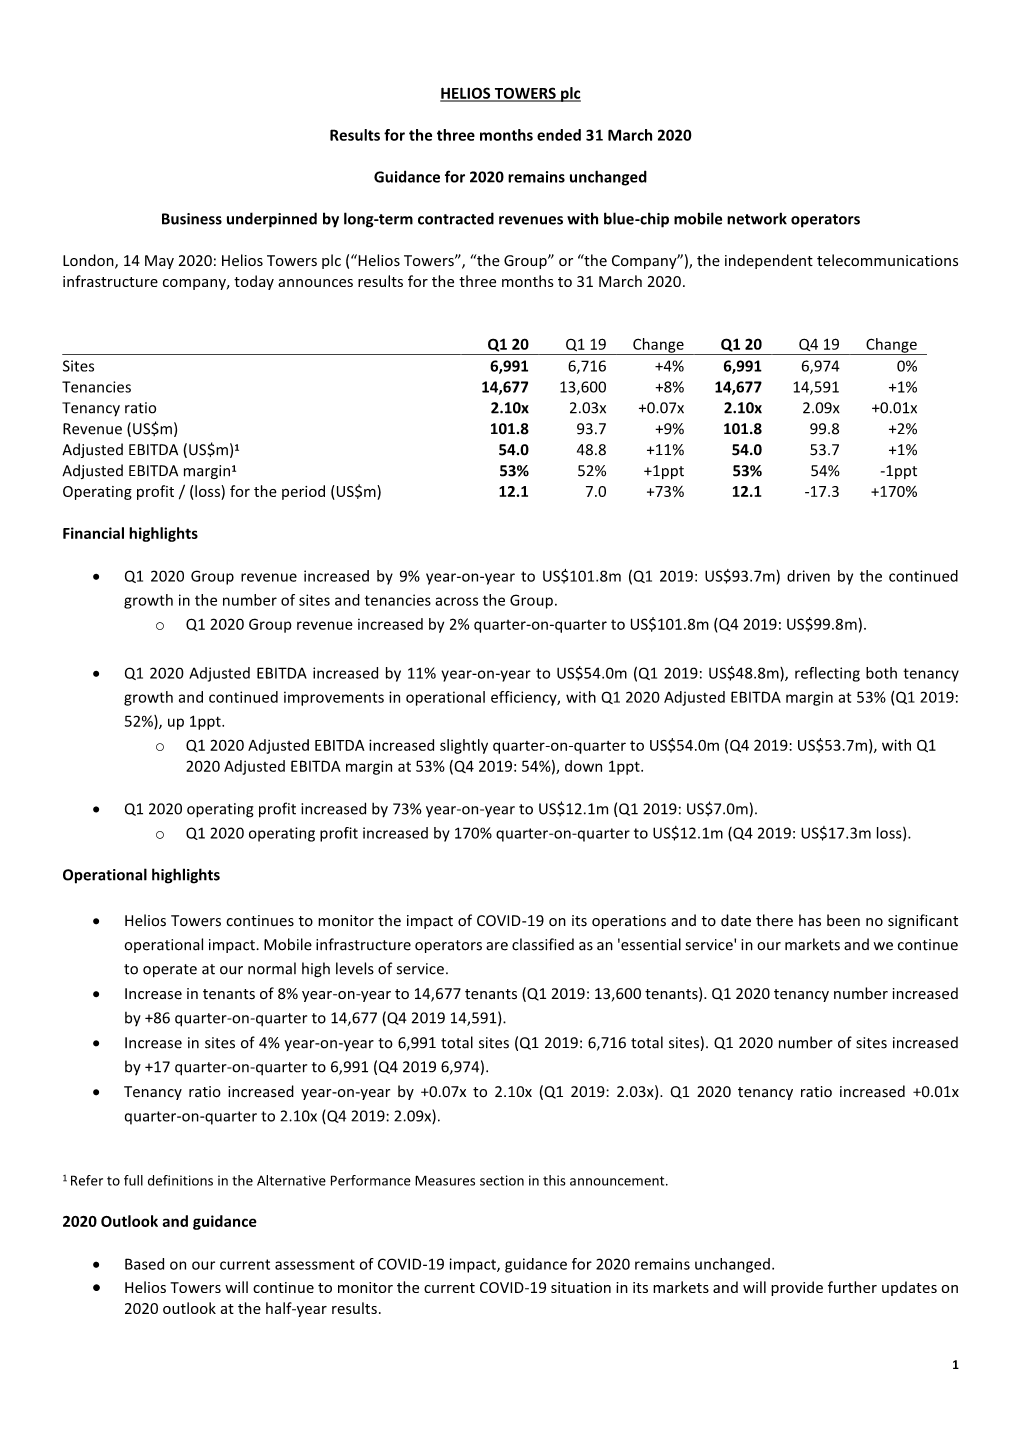 HELIOS TOWERS Plc Results for the Three Months Ended 31 March 2020